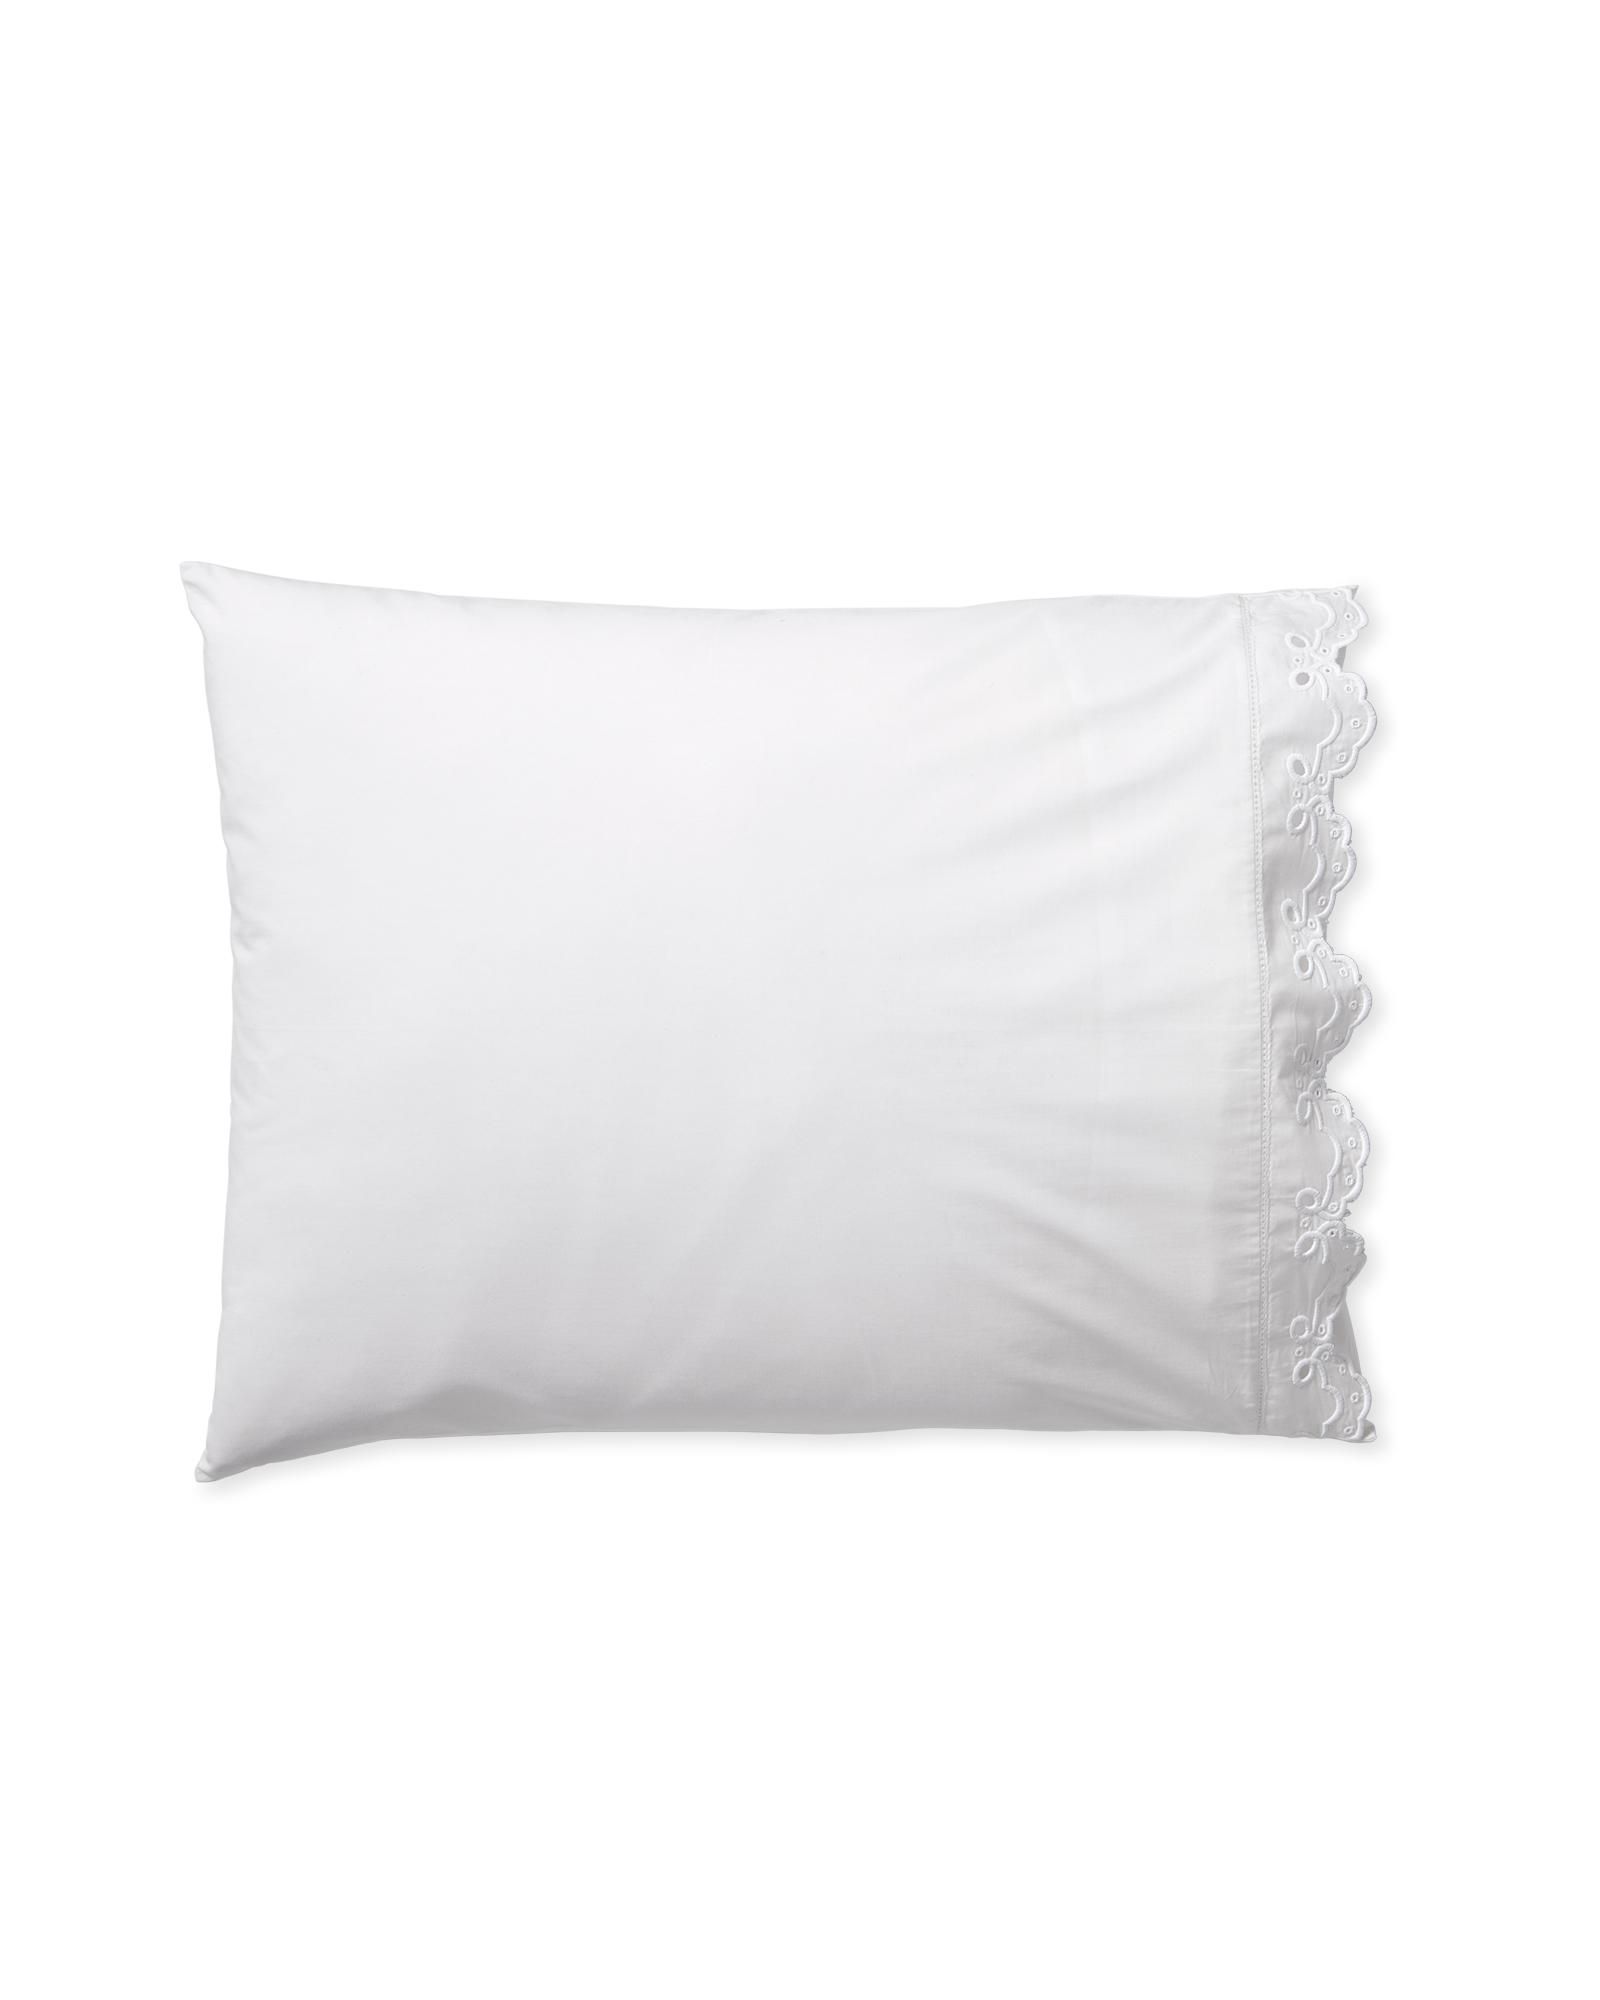 Antibes Eyelet Percale Pillowcases (Set of 2) | Serena and Lily